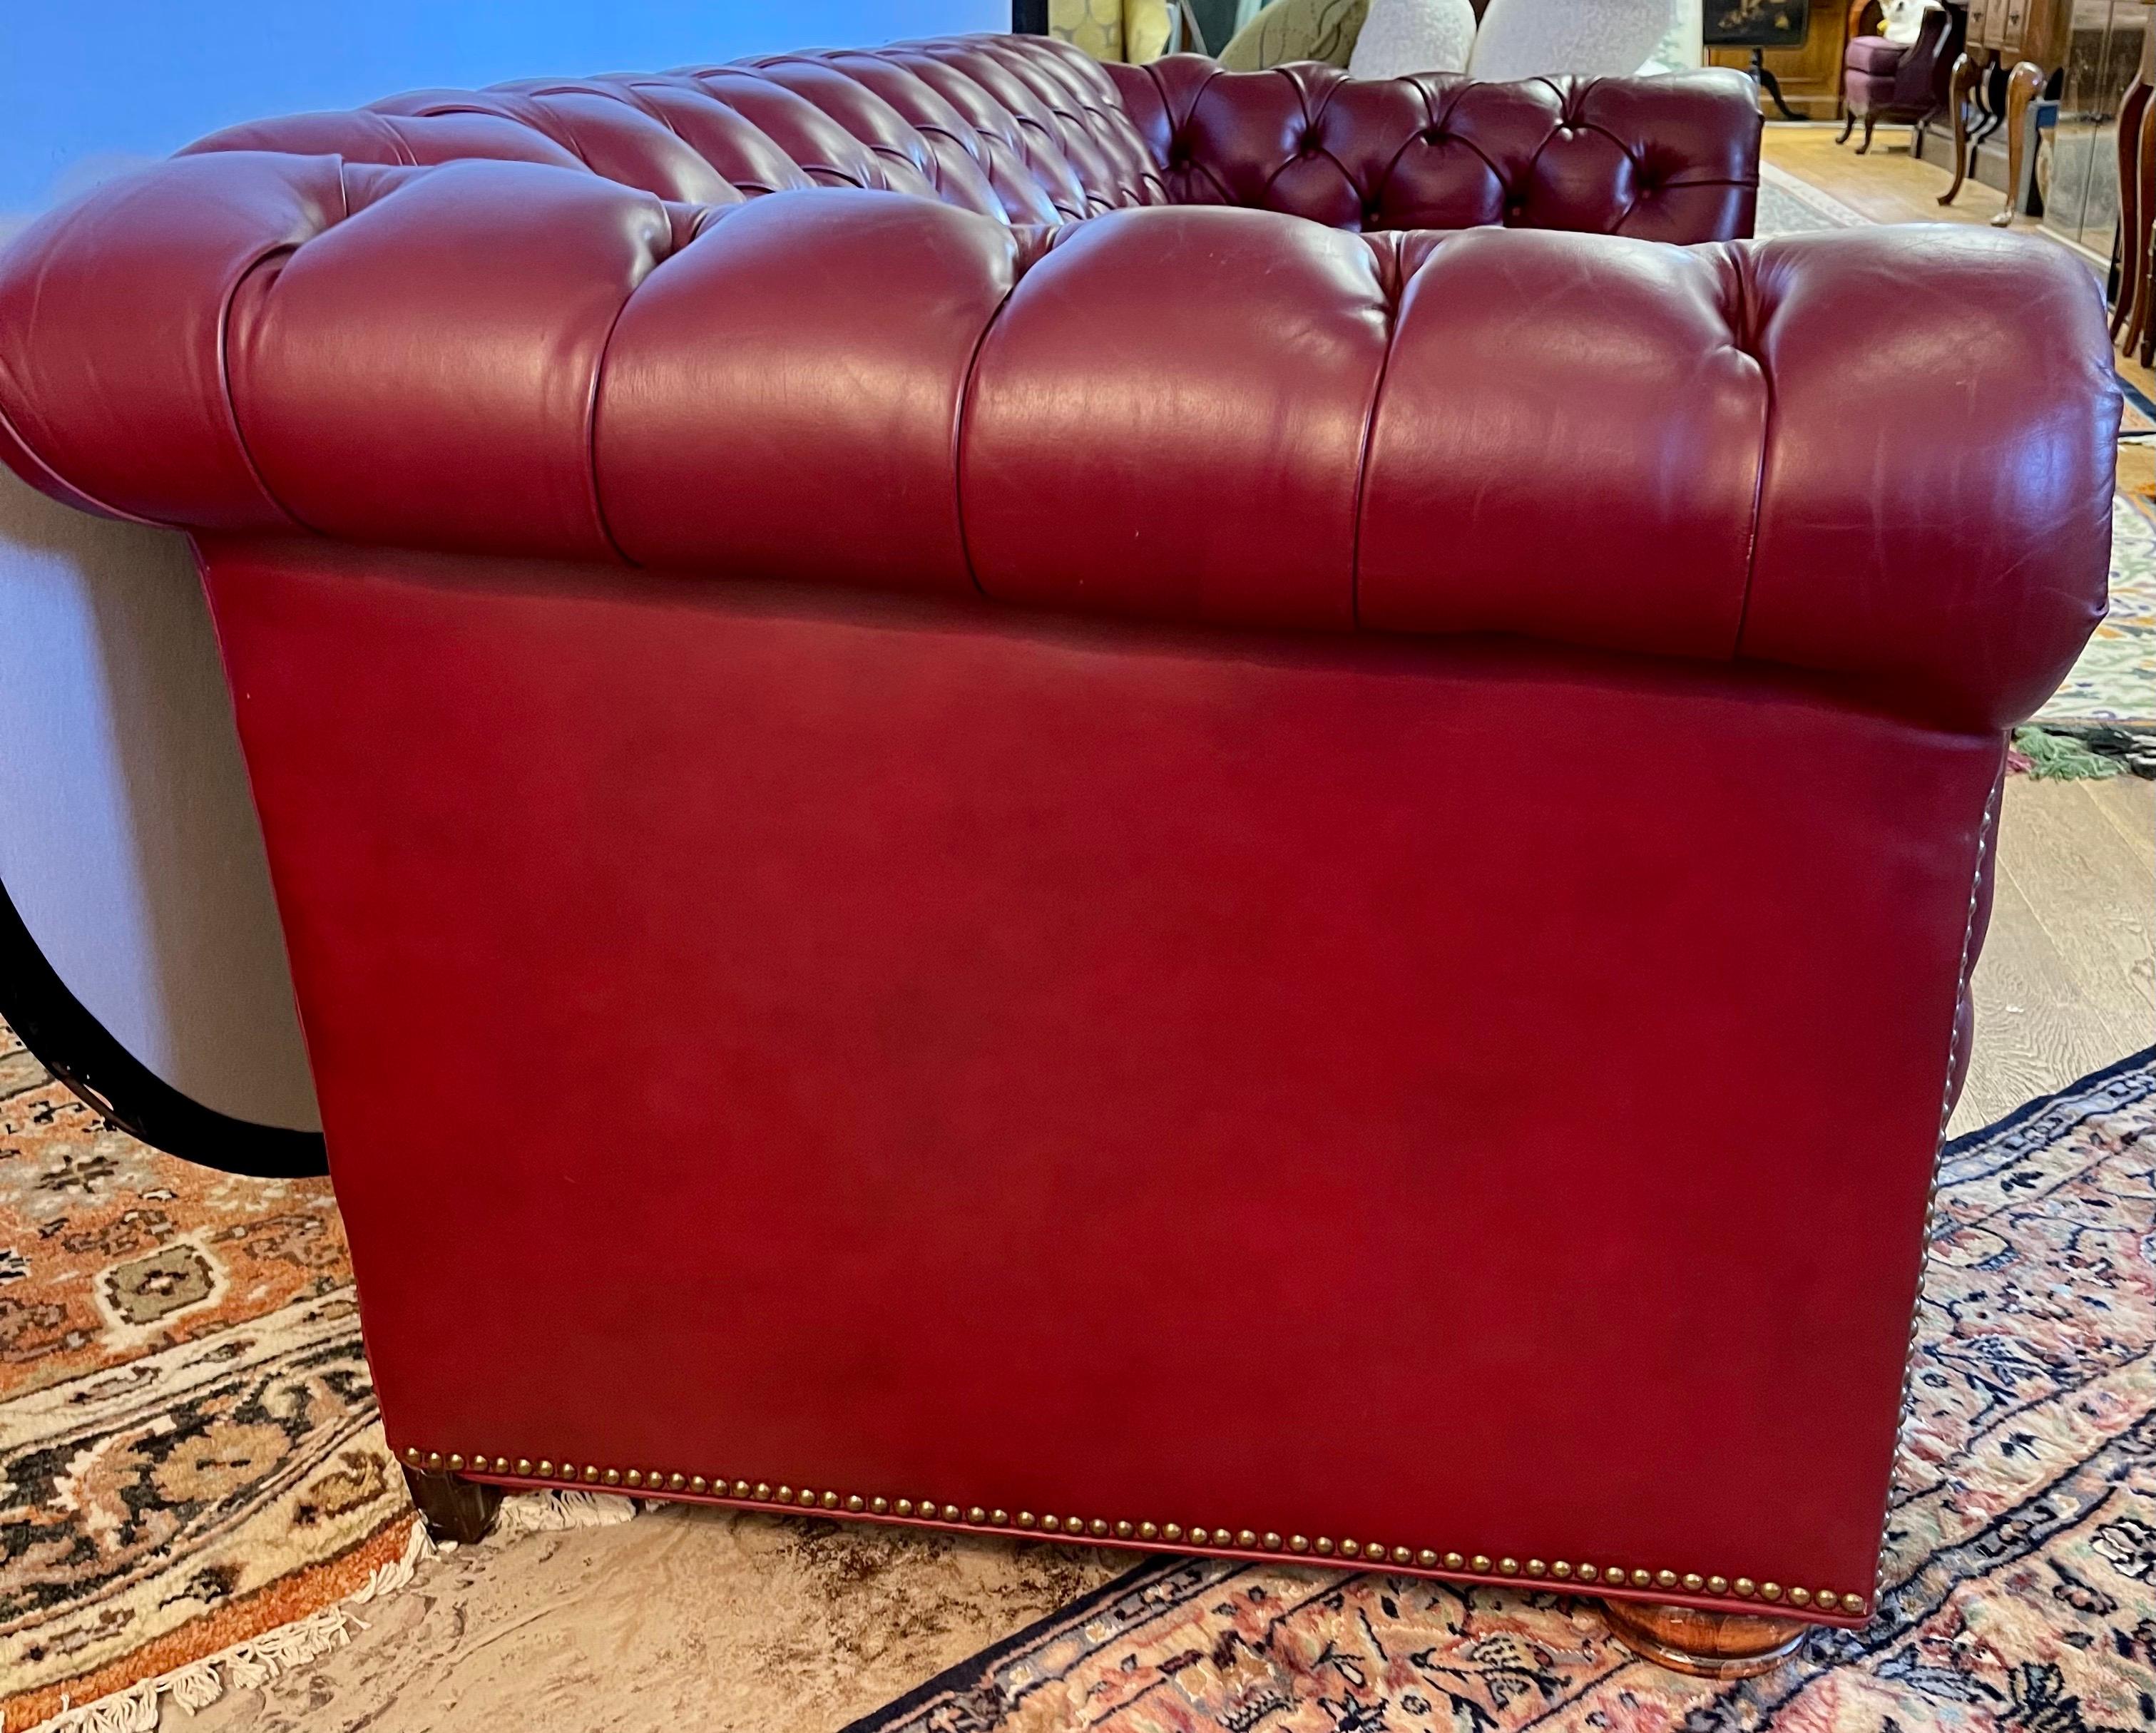 Large Oxblood Burgundy Red Leather Button Tufted Chesterfield Sofa 5